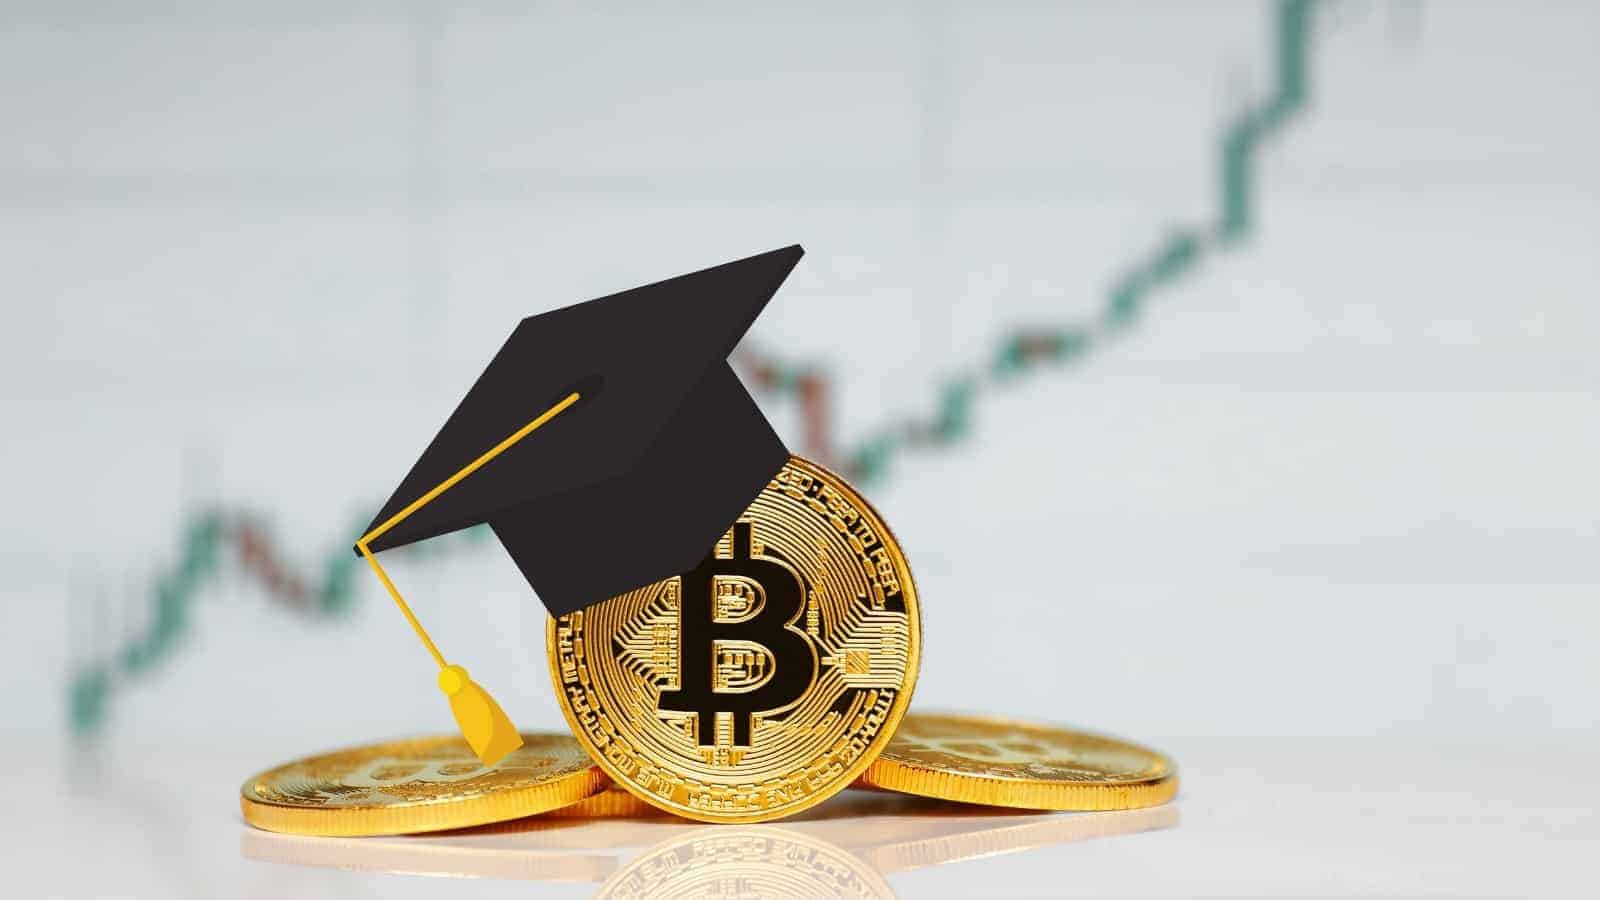 NYU to Offer Cryptocurrency Major This Fall